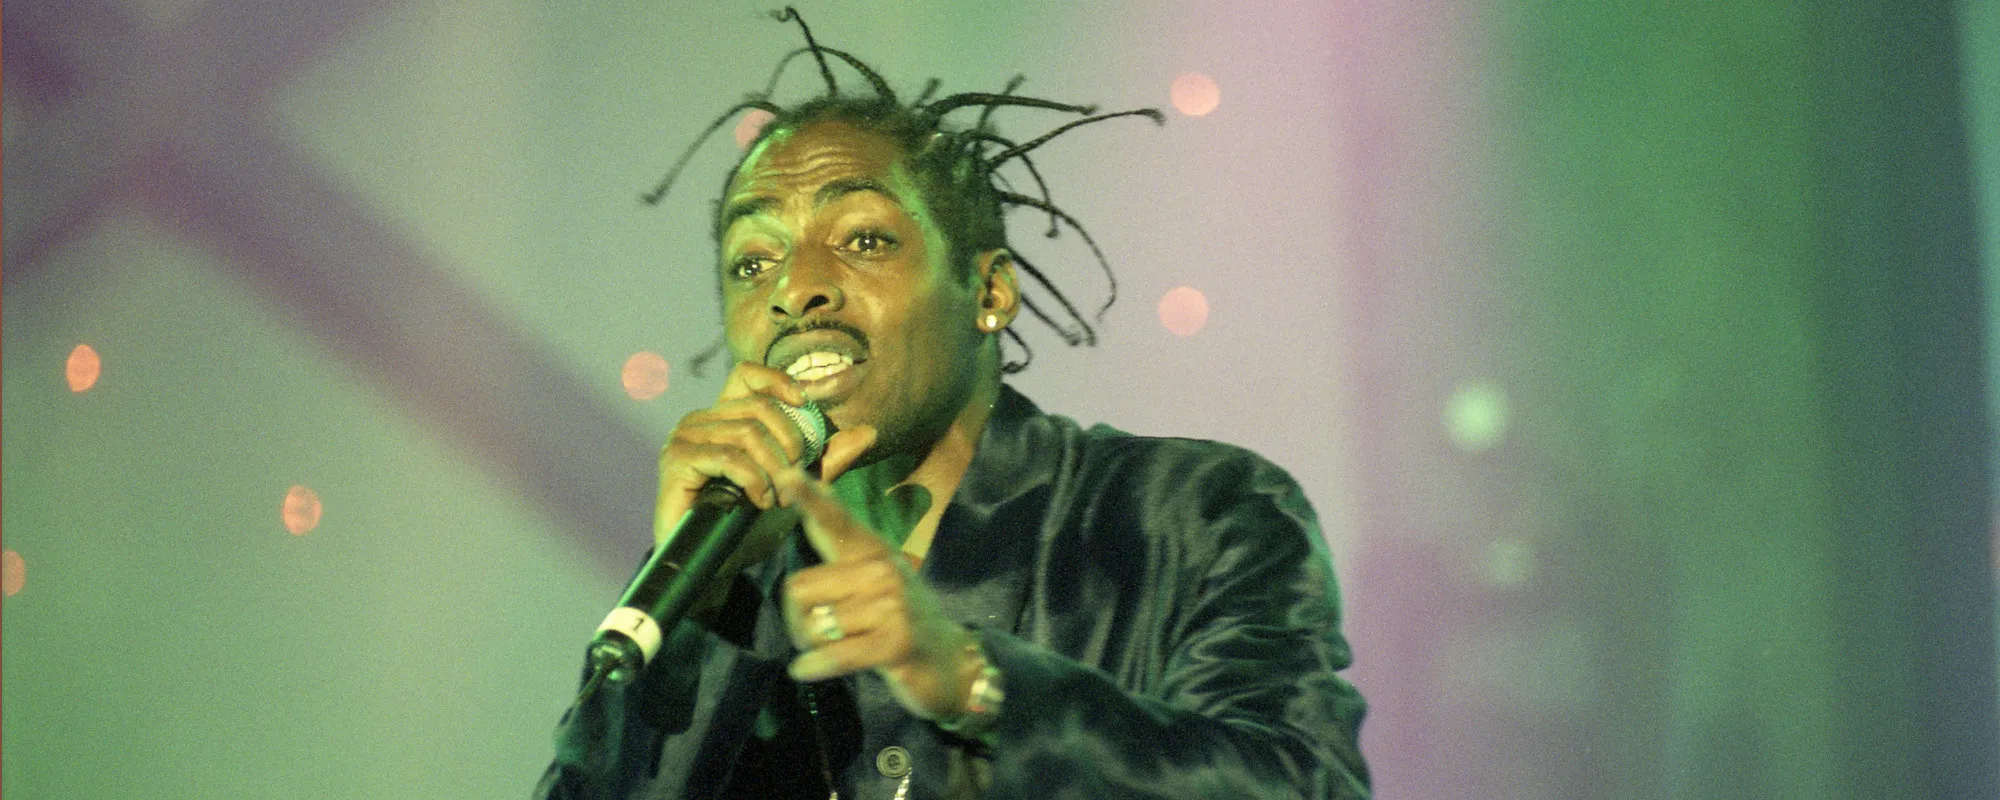 Prior to His Death, Coolio Recorded Voice Work and Music for ‘Futurama’ Cartoon